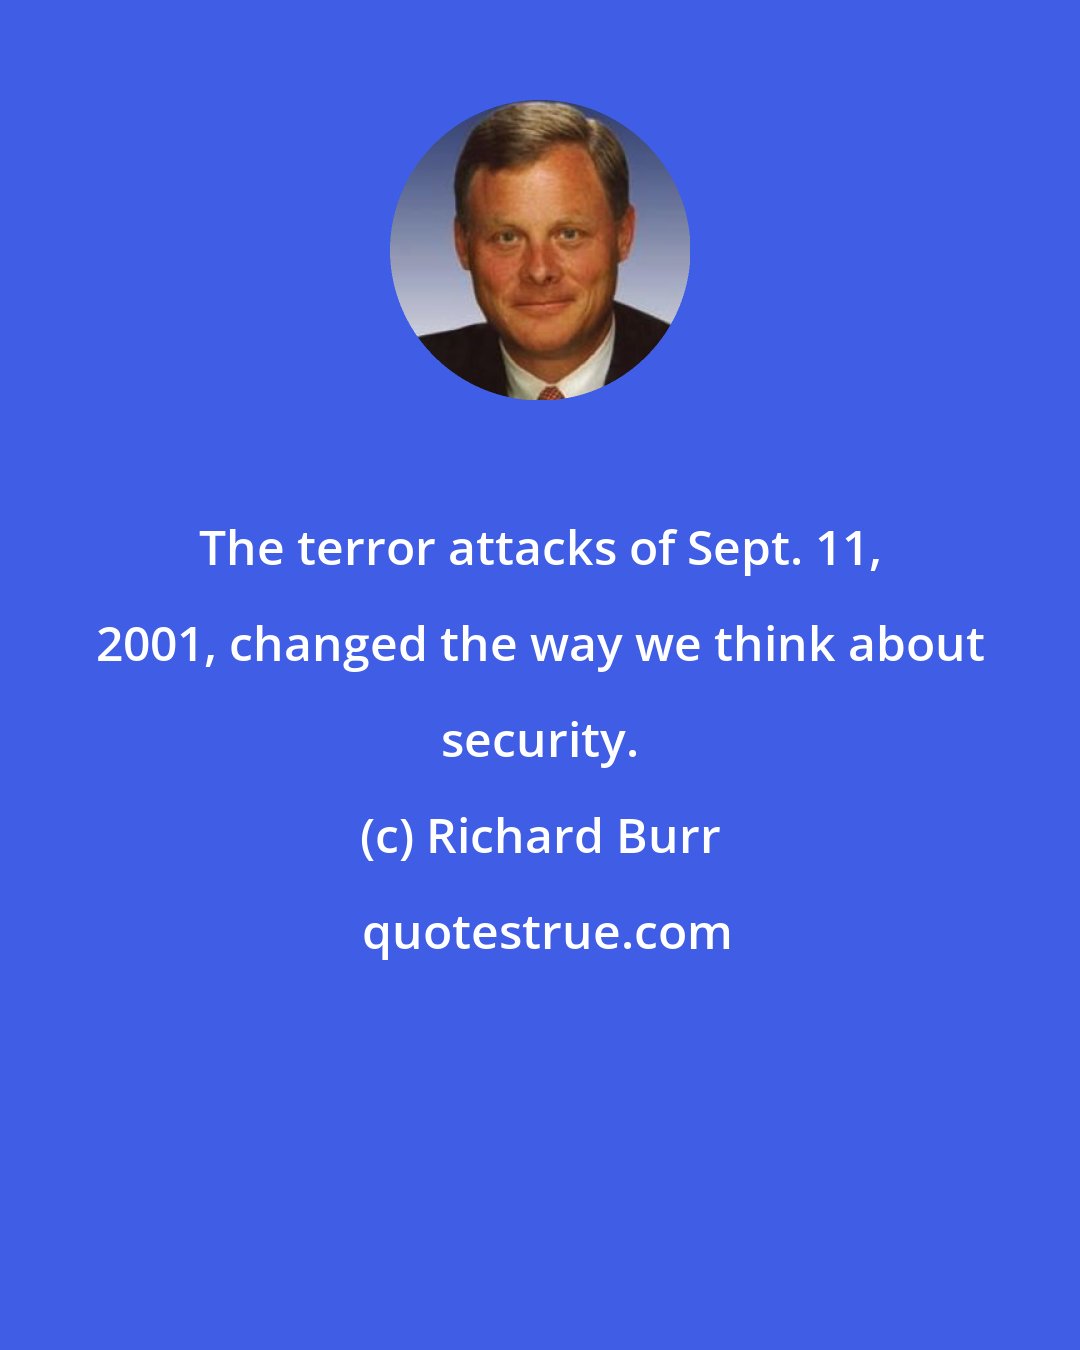 Richard Burr: The terror attacks of Sept. 11, 2001, changed the way we think about security.